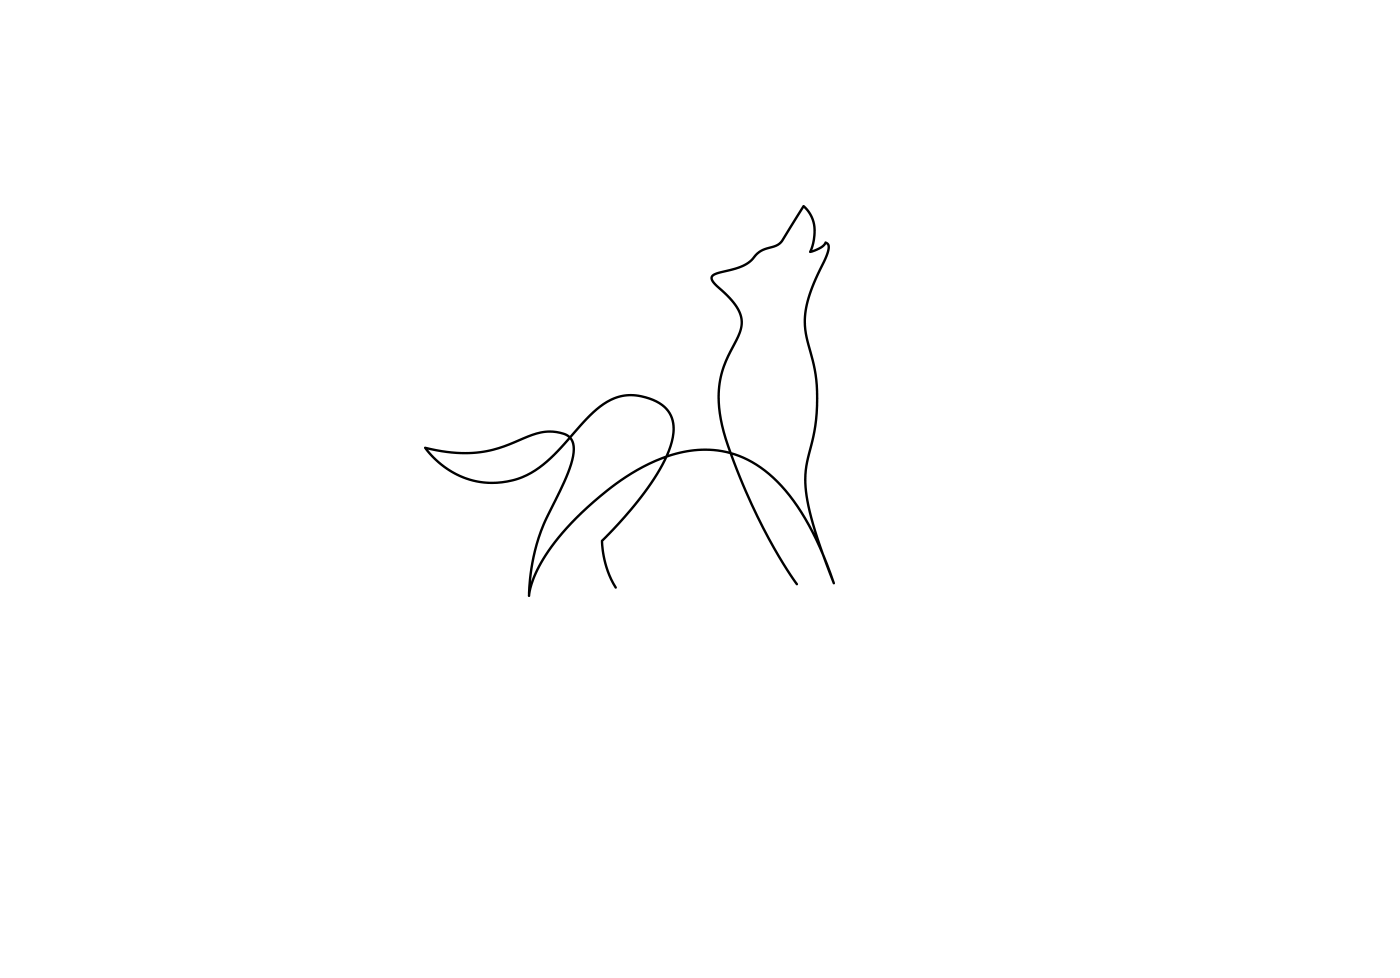 animals logos icons one line continuous line oneline minimal logo lineart line art